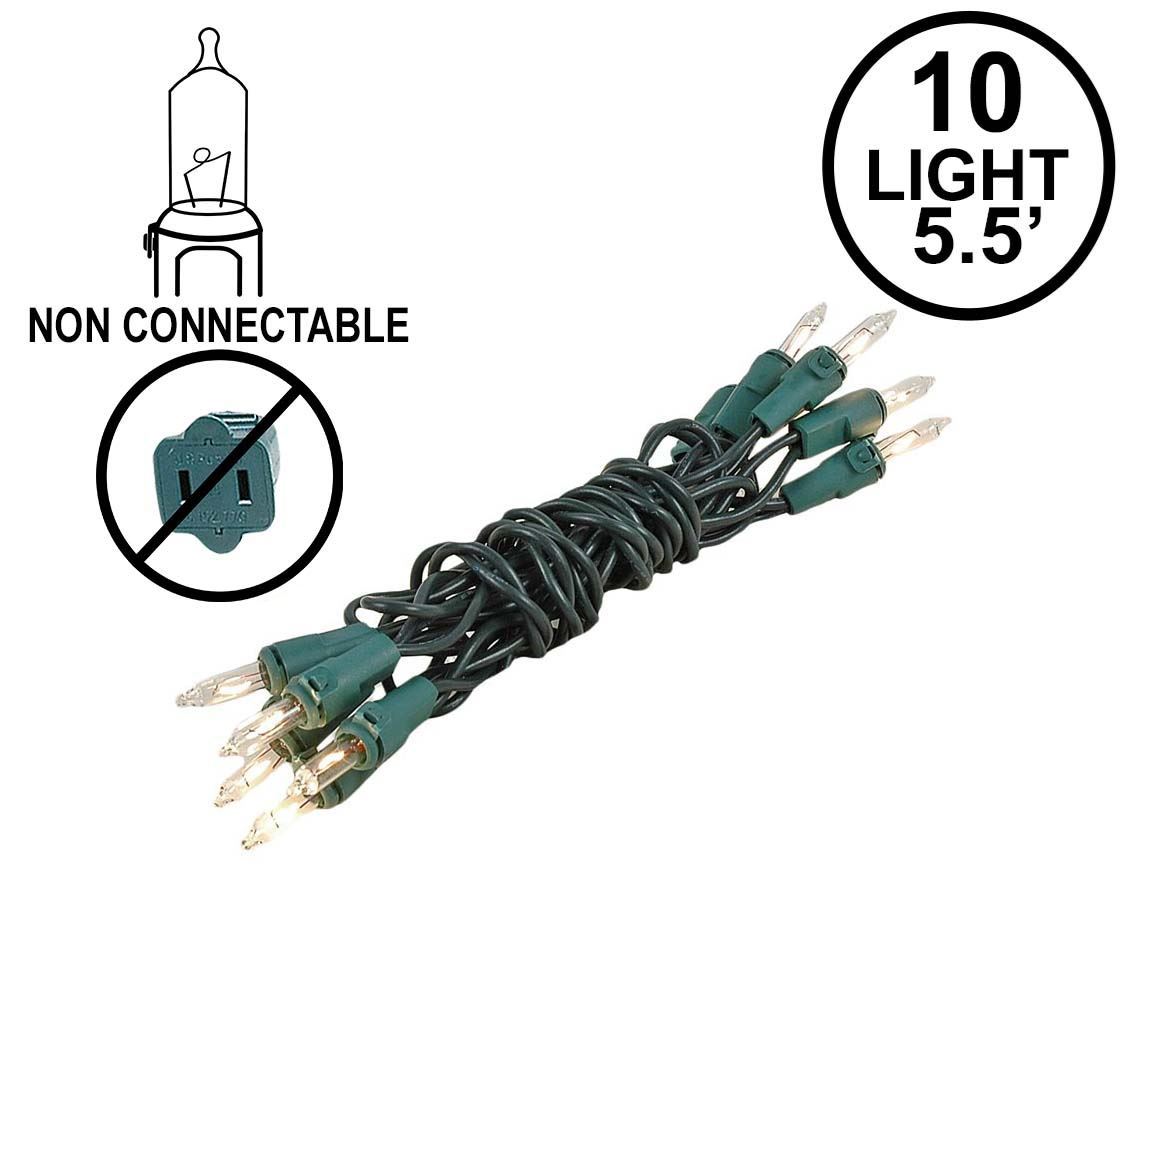 Picture of Non Connectable Green Wire Mini Lights 10 Light 5.5'